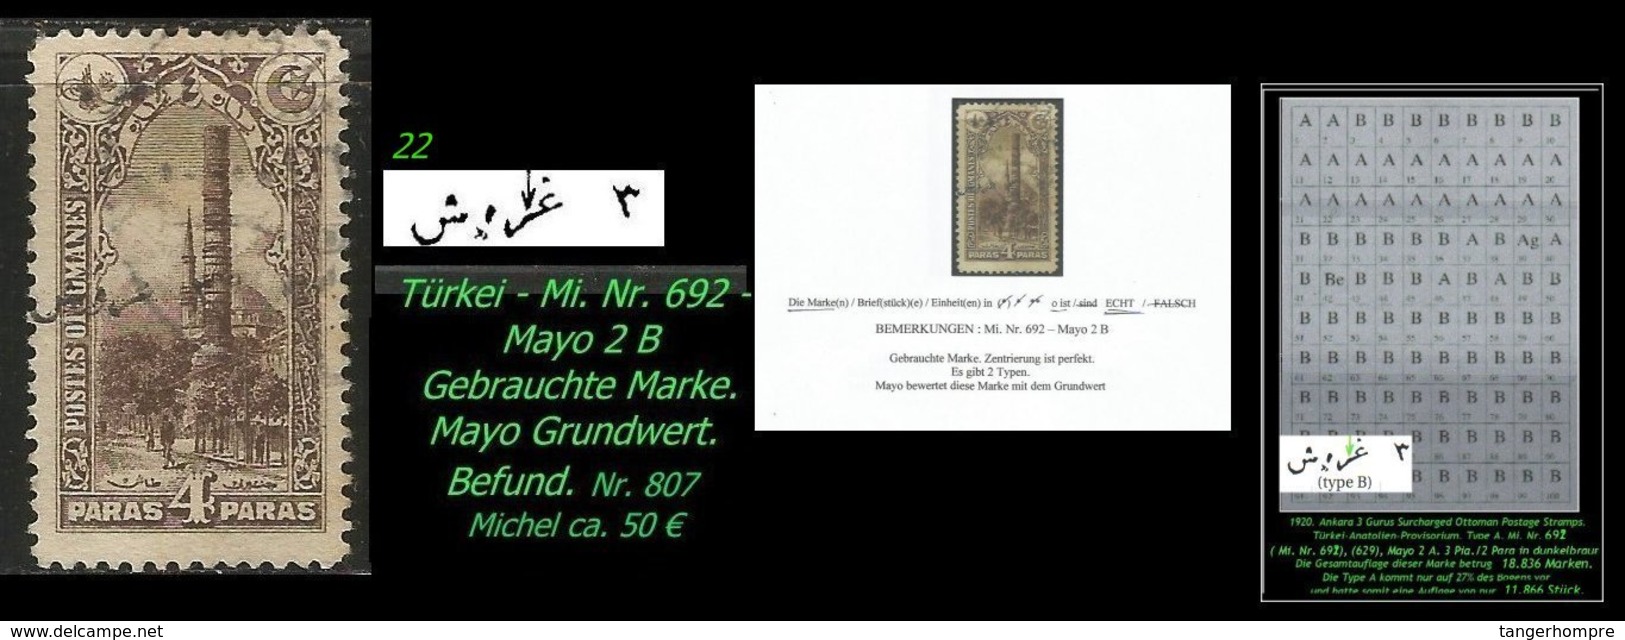 EARLY OTTOMAN SPECIALIZED FOR SPECIALIST, SEE...Mi. Nr. 692 - Mayo Nr. 2 B - 1920-21 Anatolia